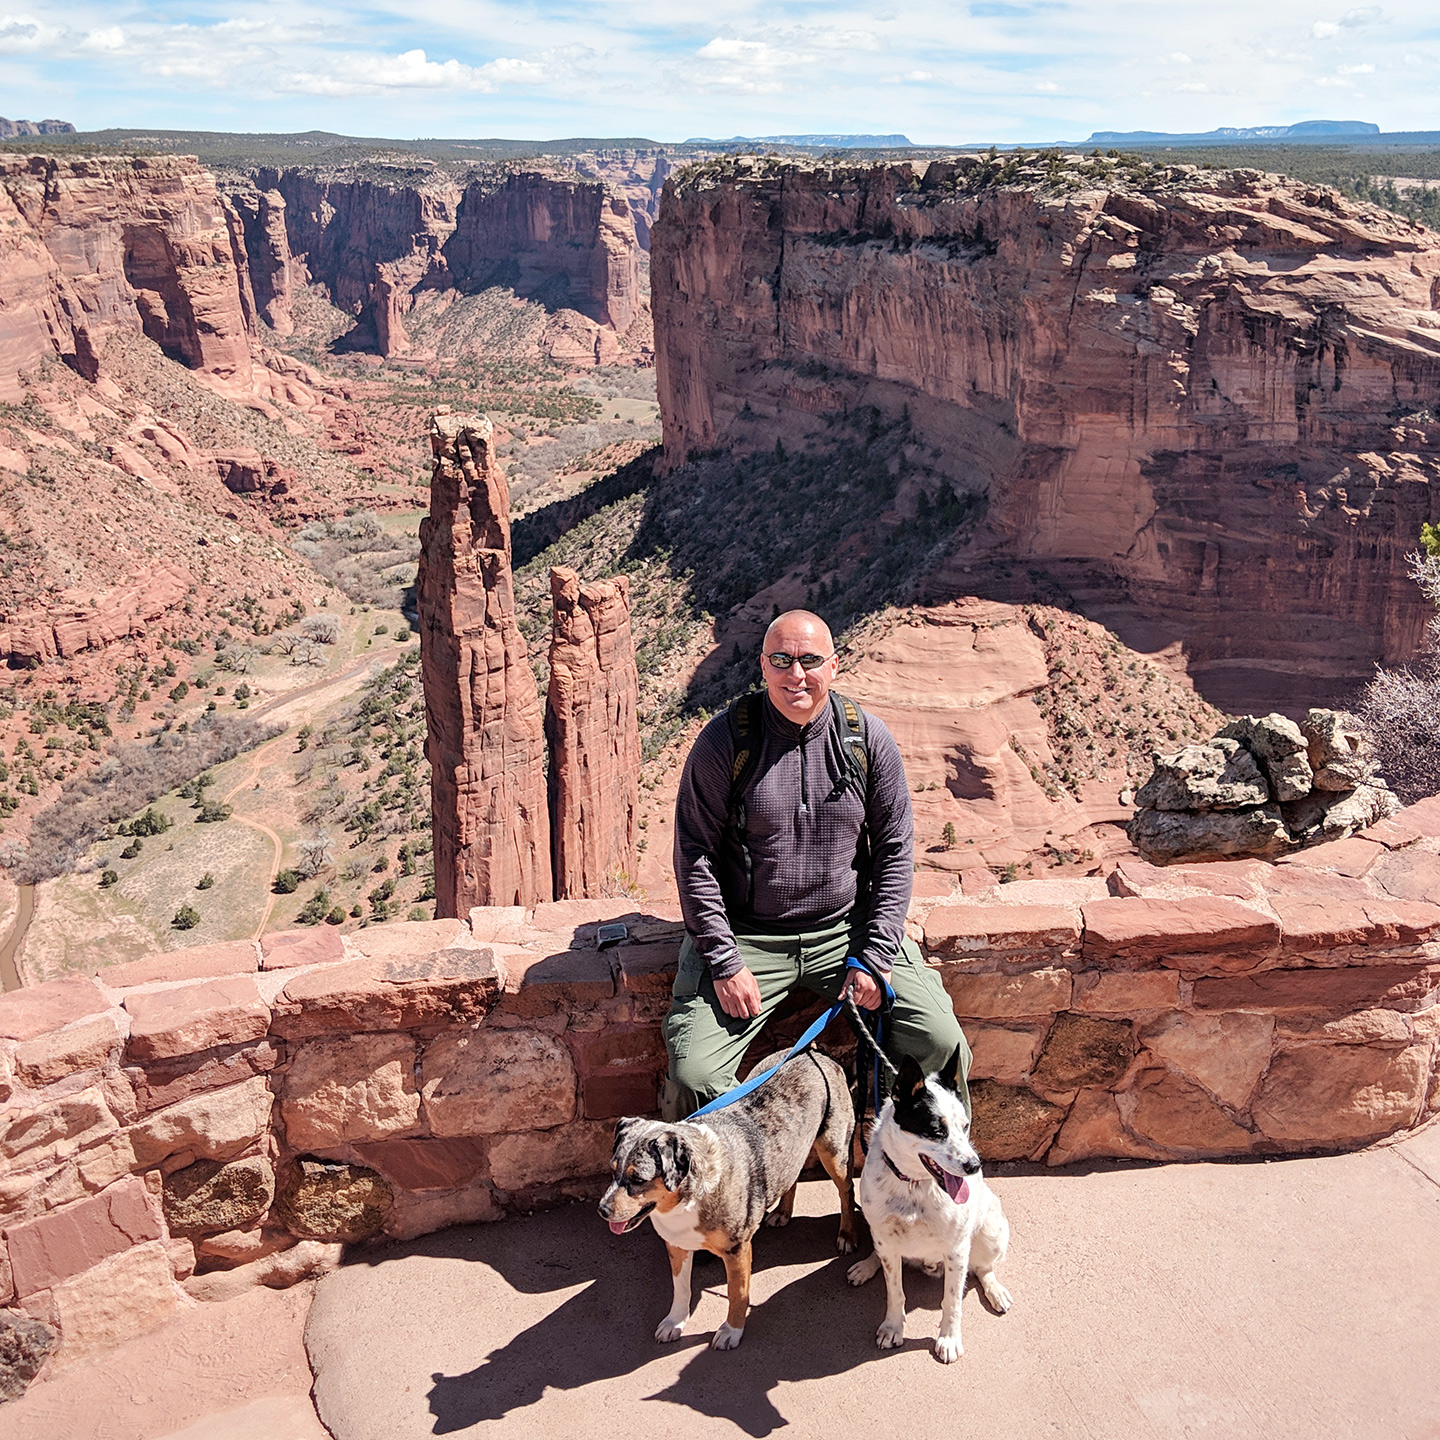 The dogs at Canyon de Chelly